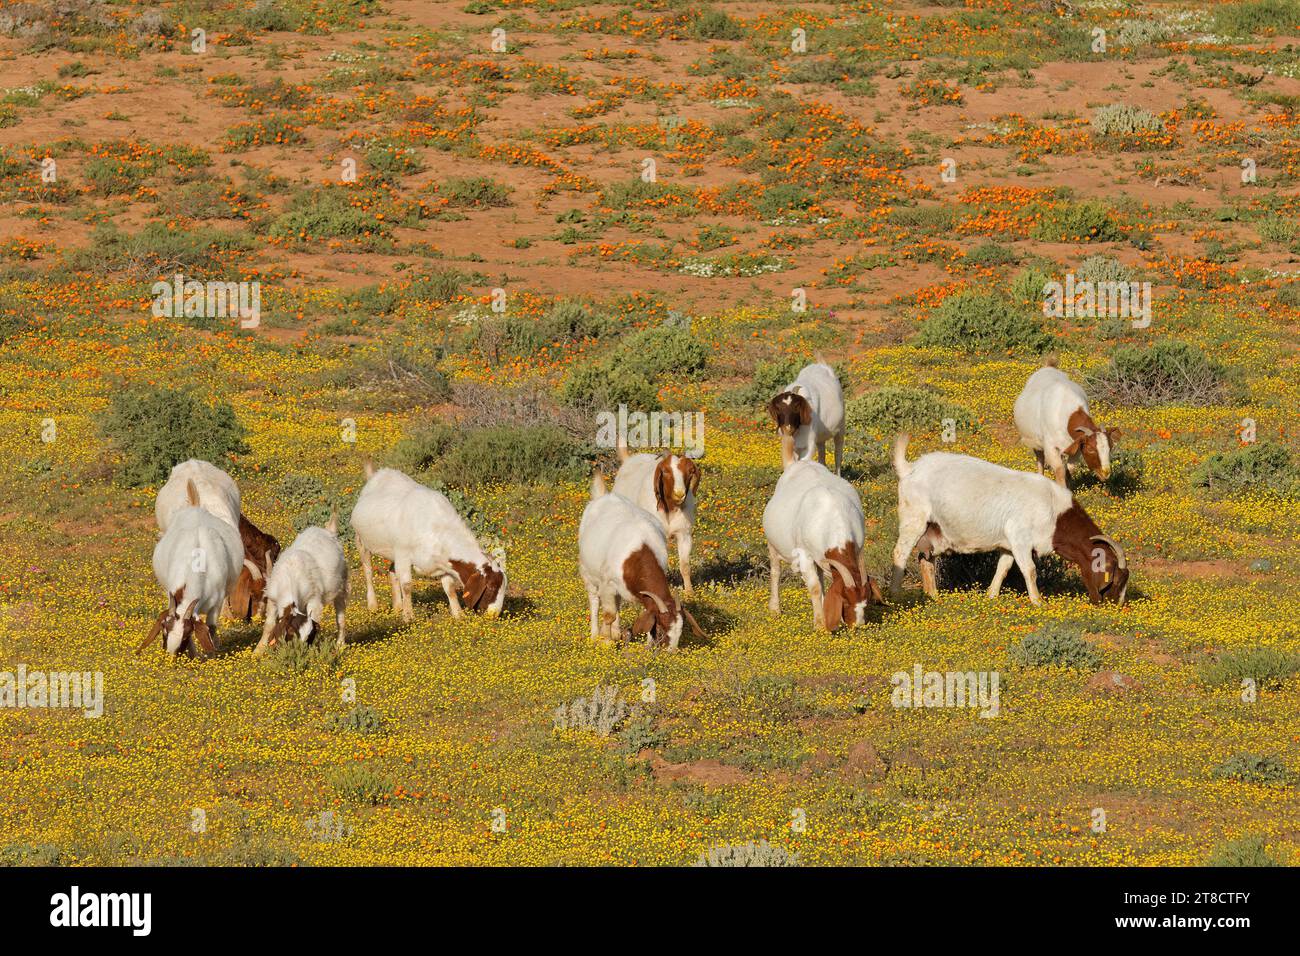 Free-range goats feeding in a field with yellow wild flowers, Namaqualand, South Africa Stock Photo